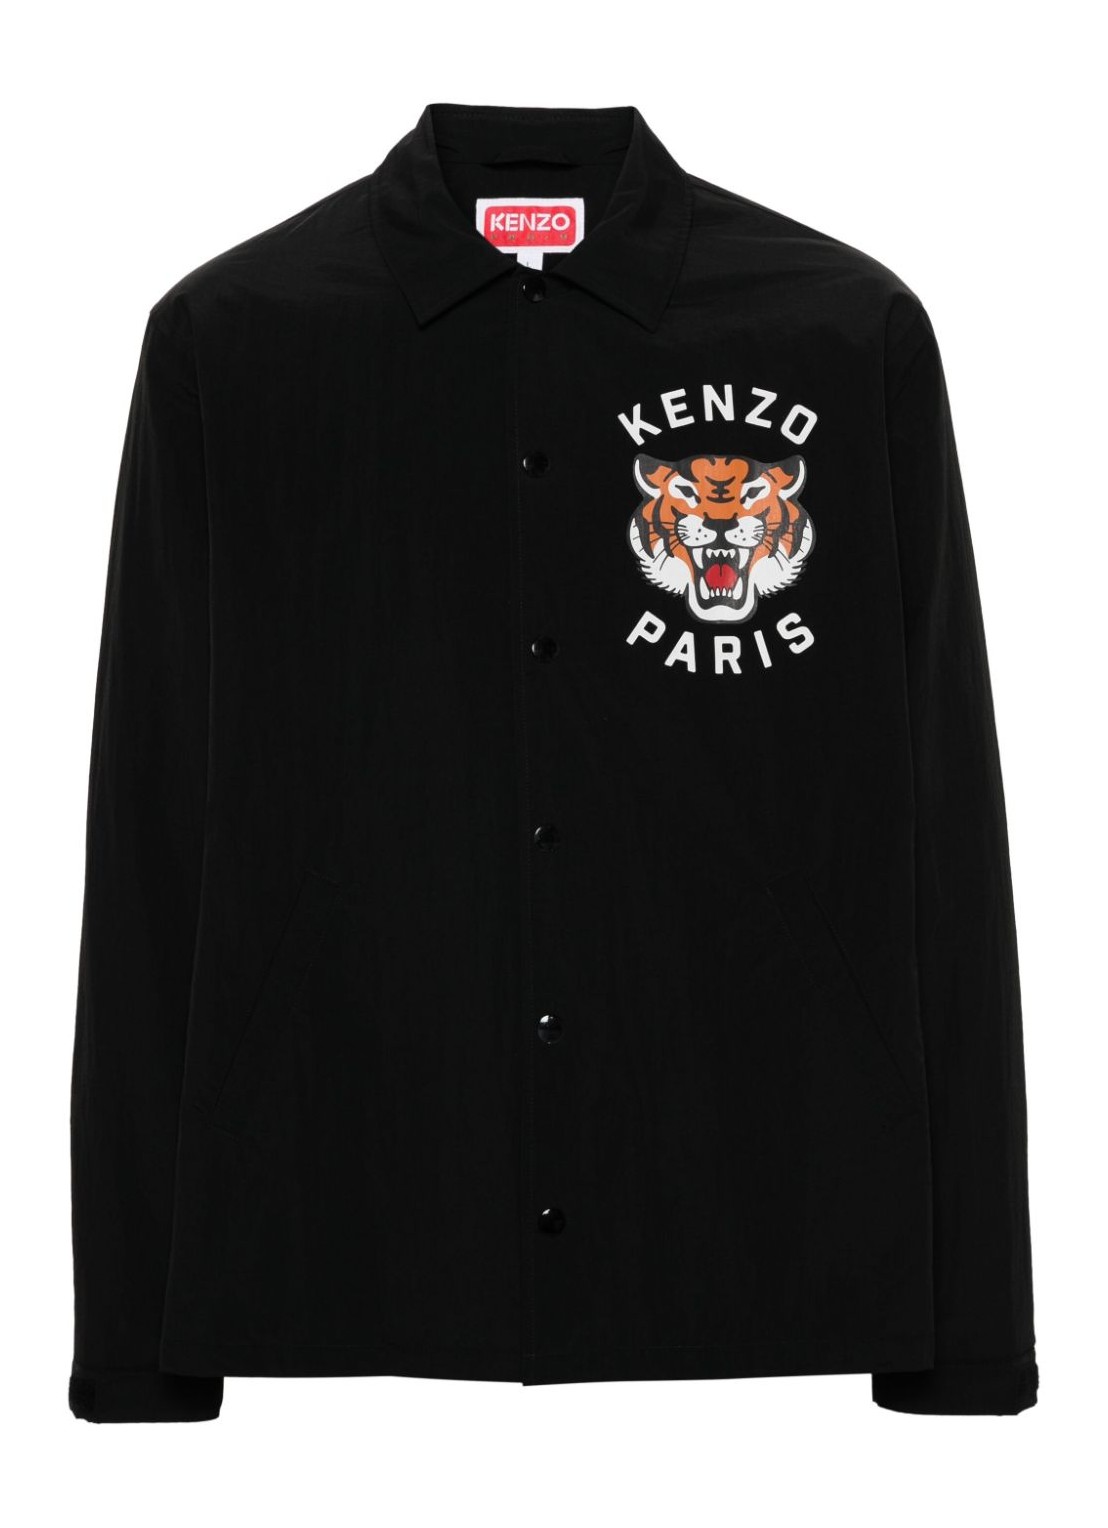 Outerwear kenzo outerwear man lucky tiger padded coach fe55bl0629ng 99 talla negro
 